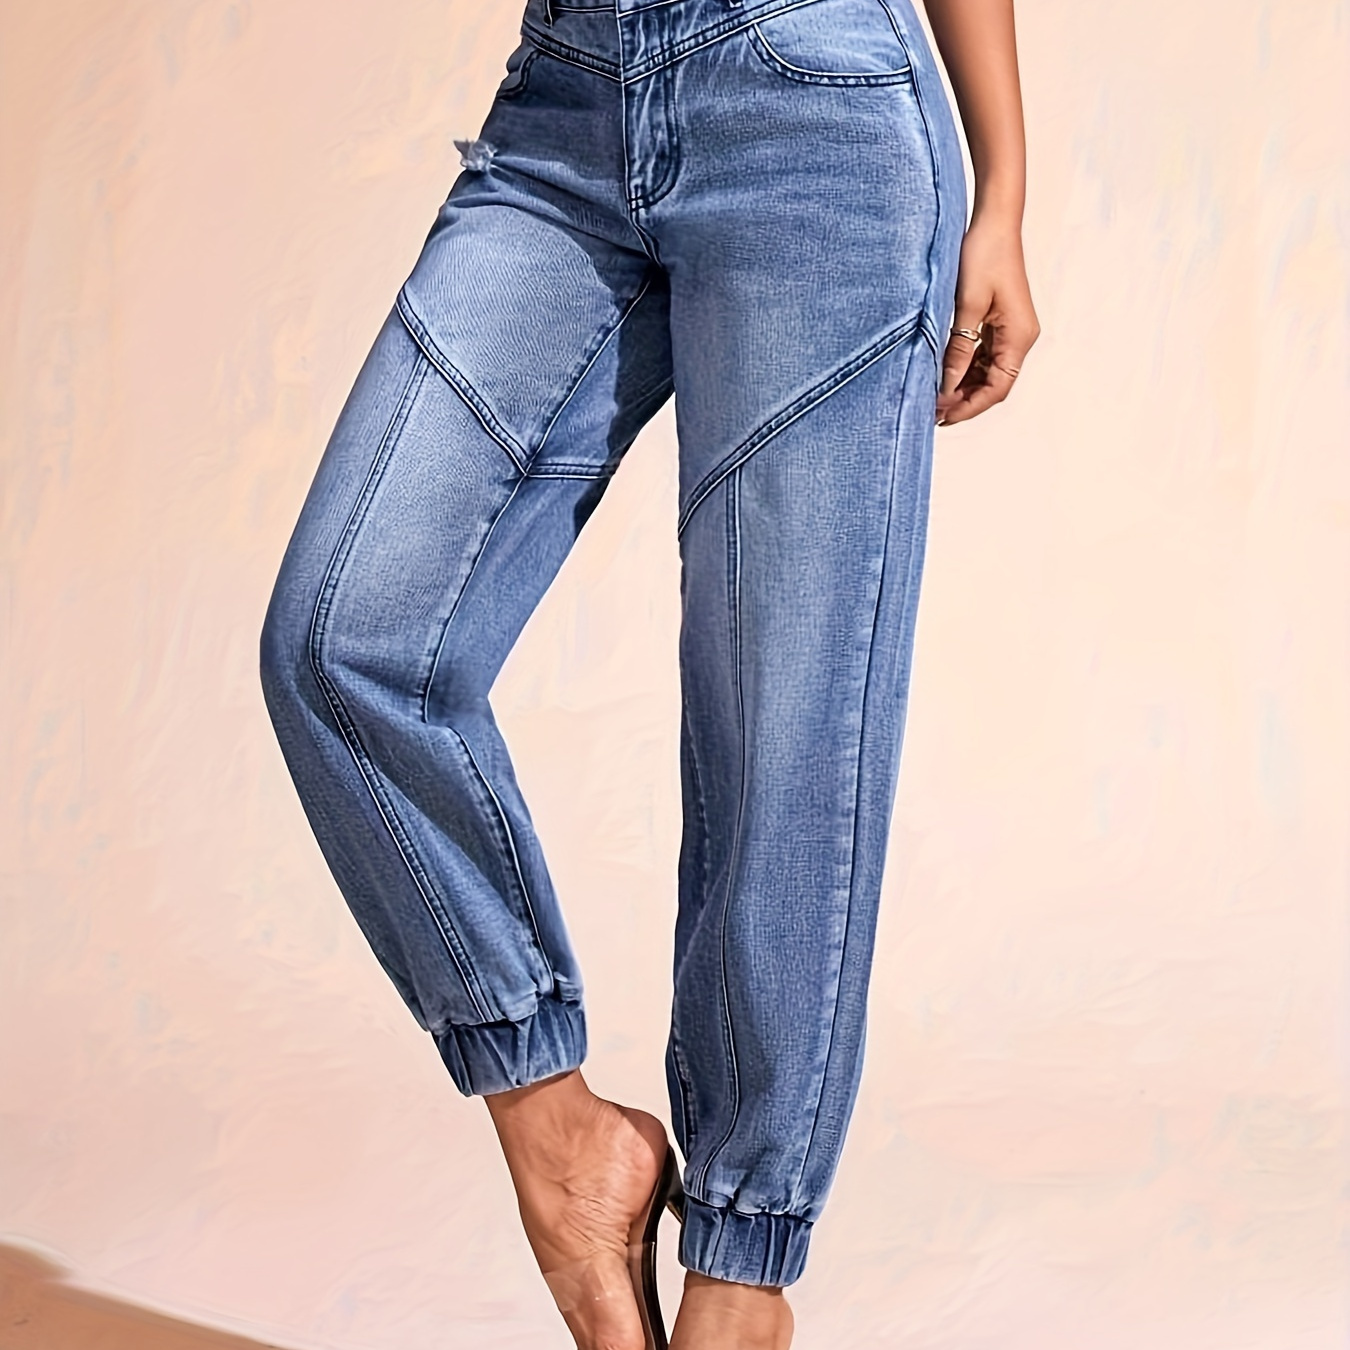 

Women's Stylish Casual Denim Jeans, Jogger Style With Elastic Cuffs And Distressed Ripped Detail, Versatile Blue Pants For Everyday Wear